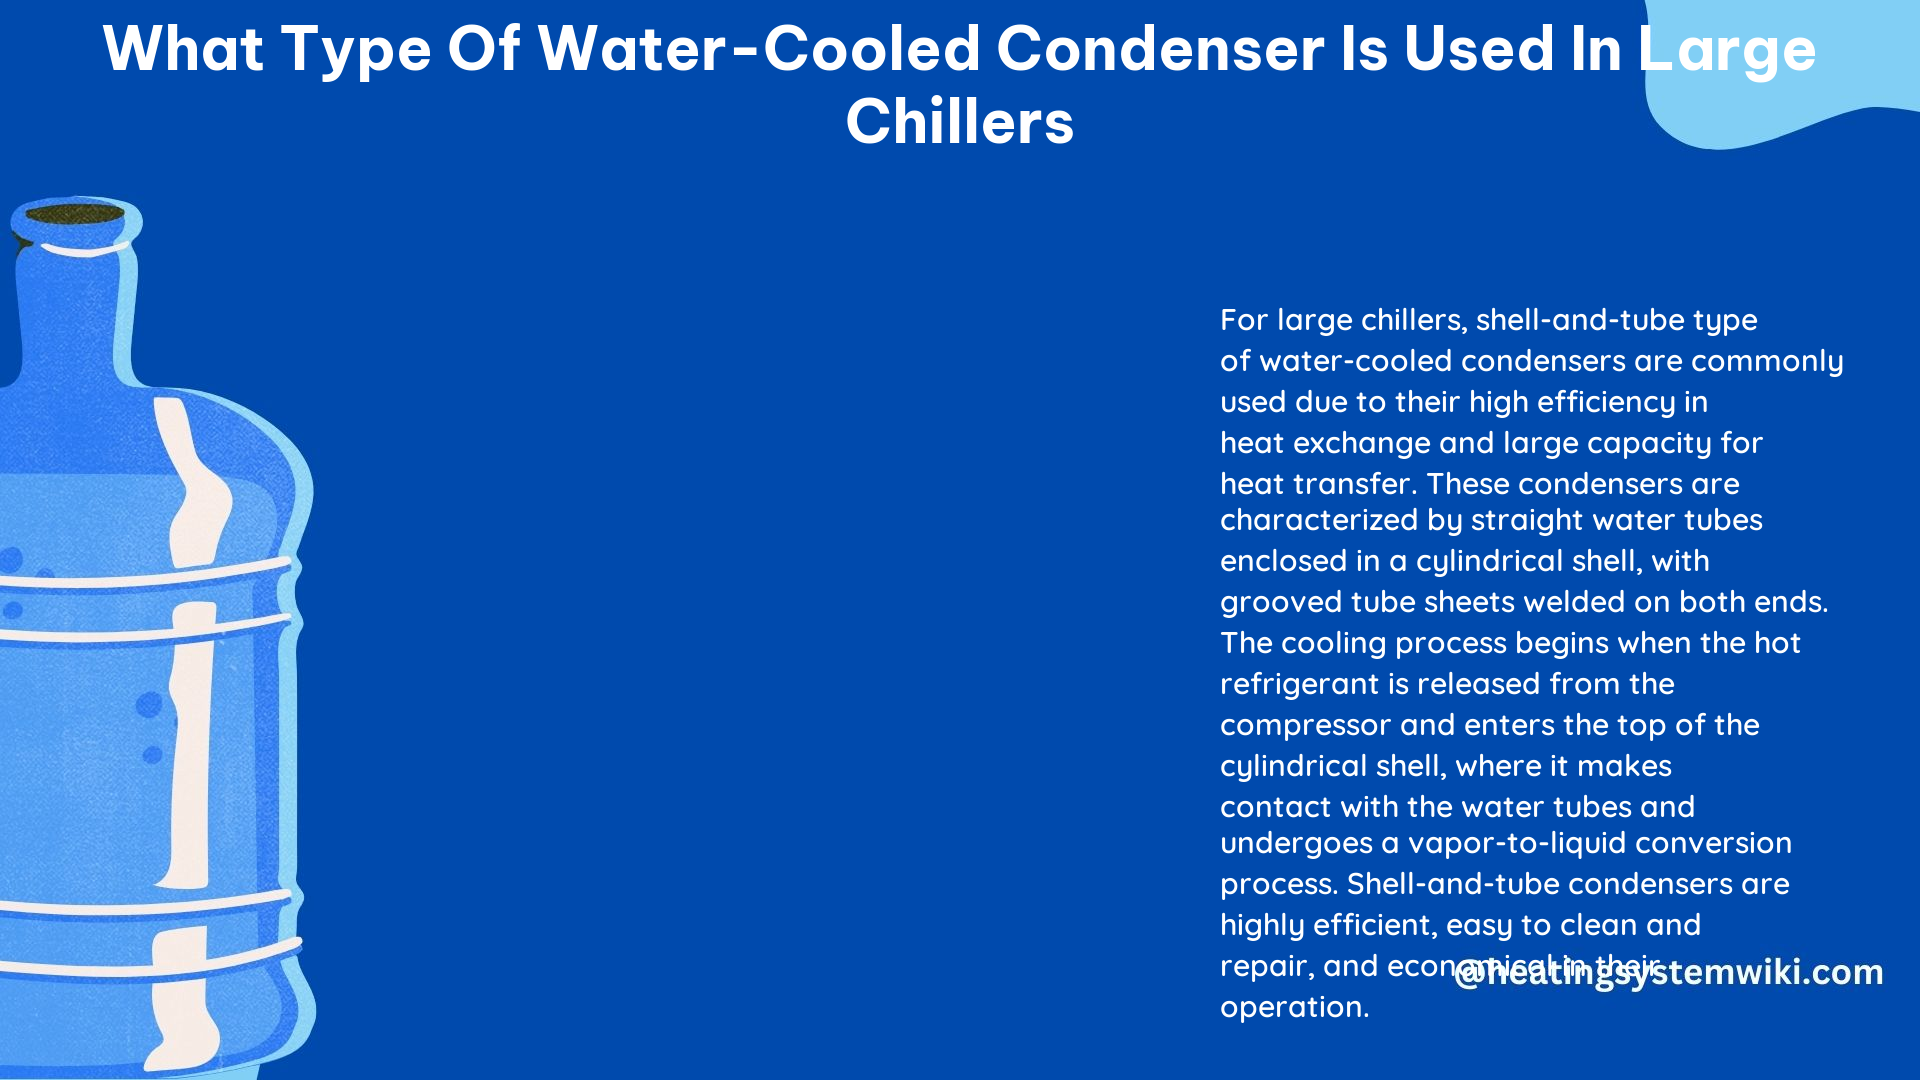 What Type of Water-Cooled Condenser Is Used in Large Chillers